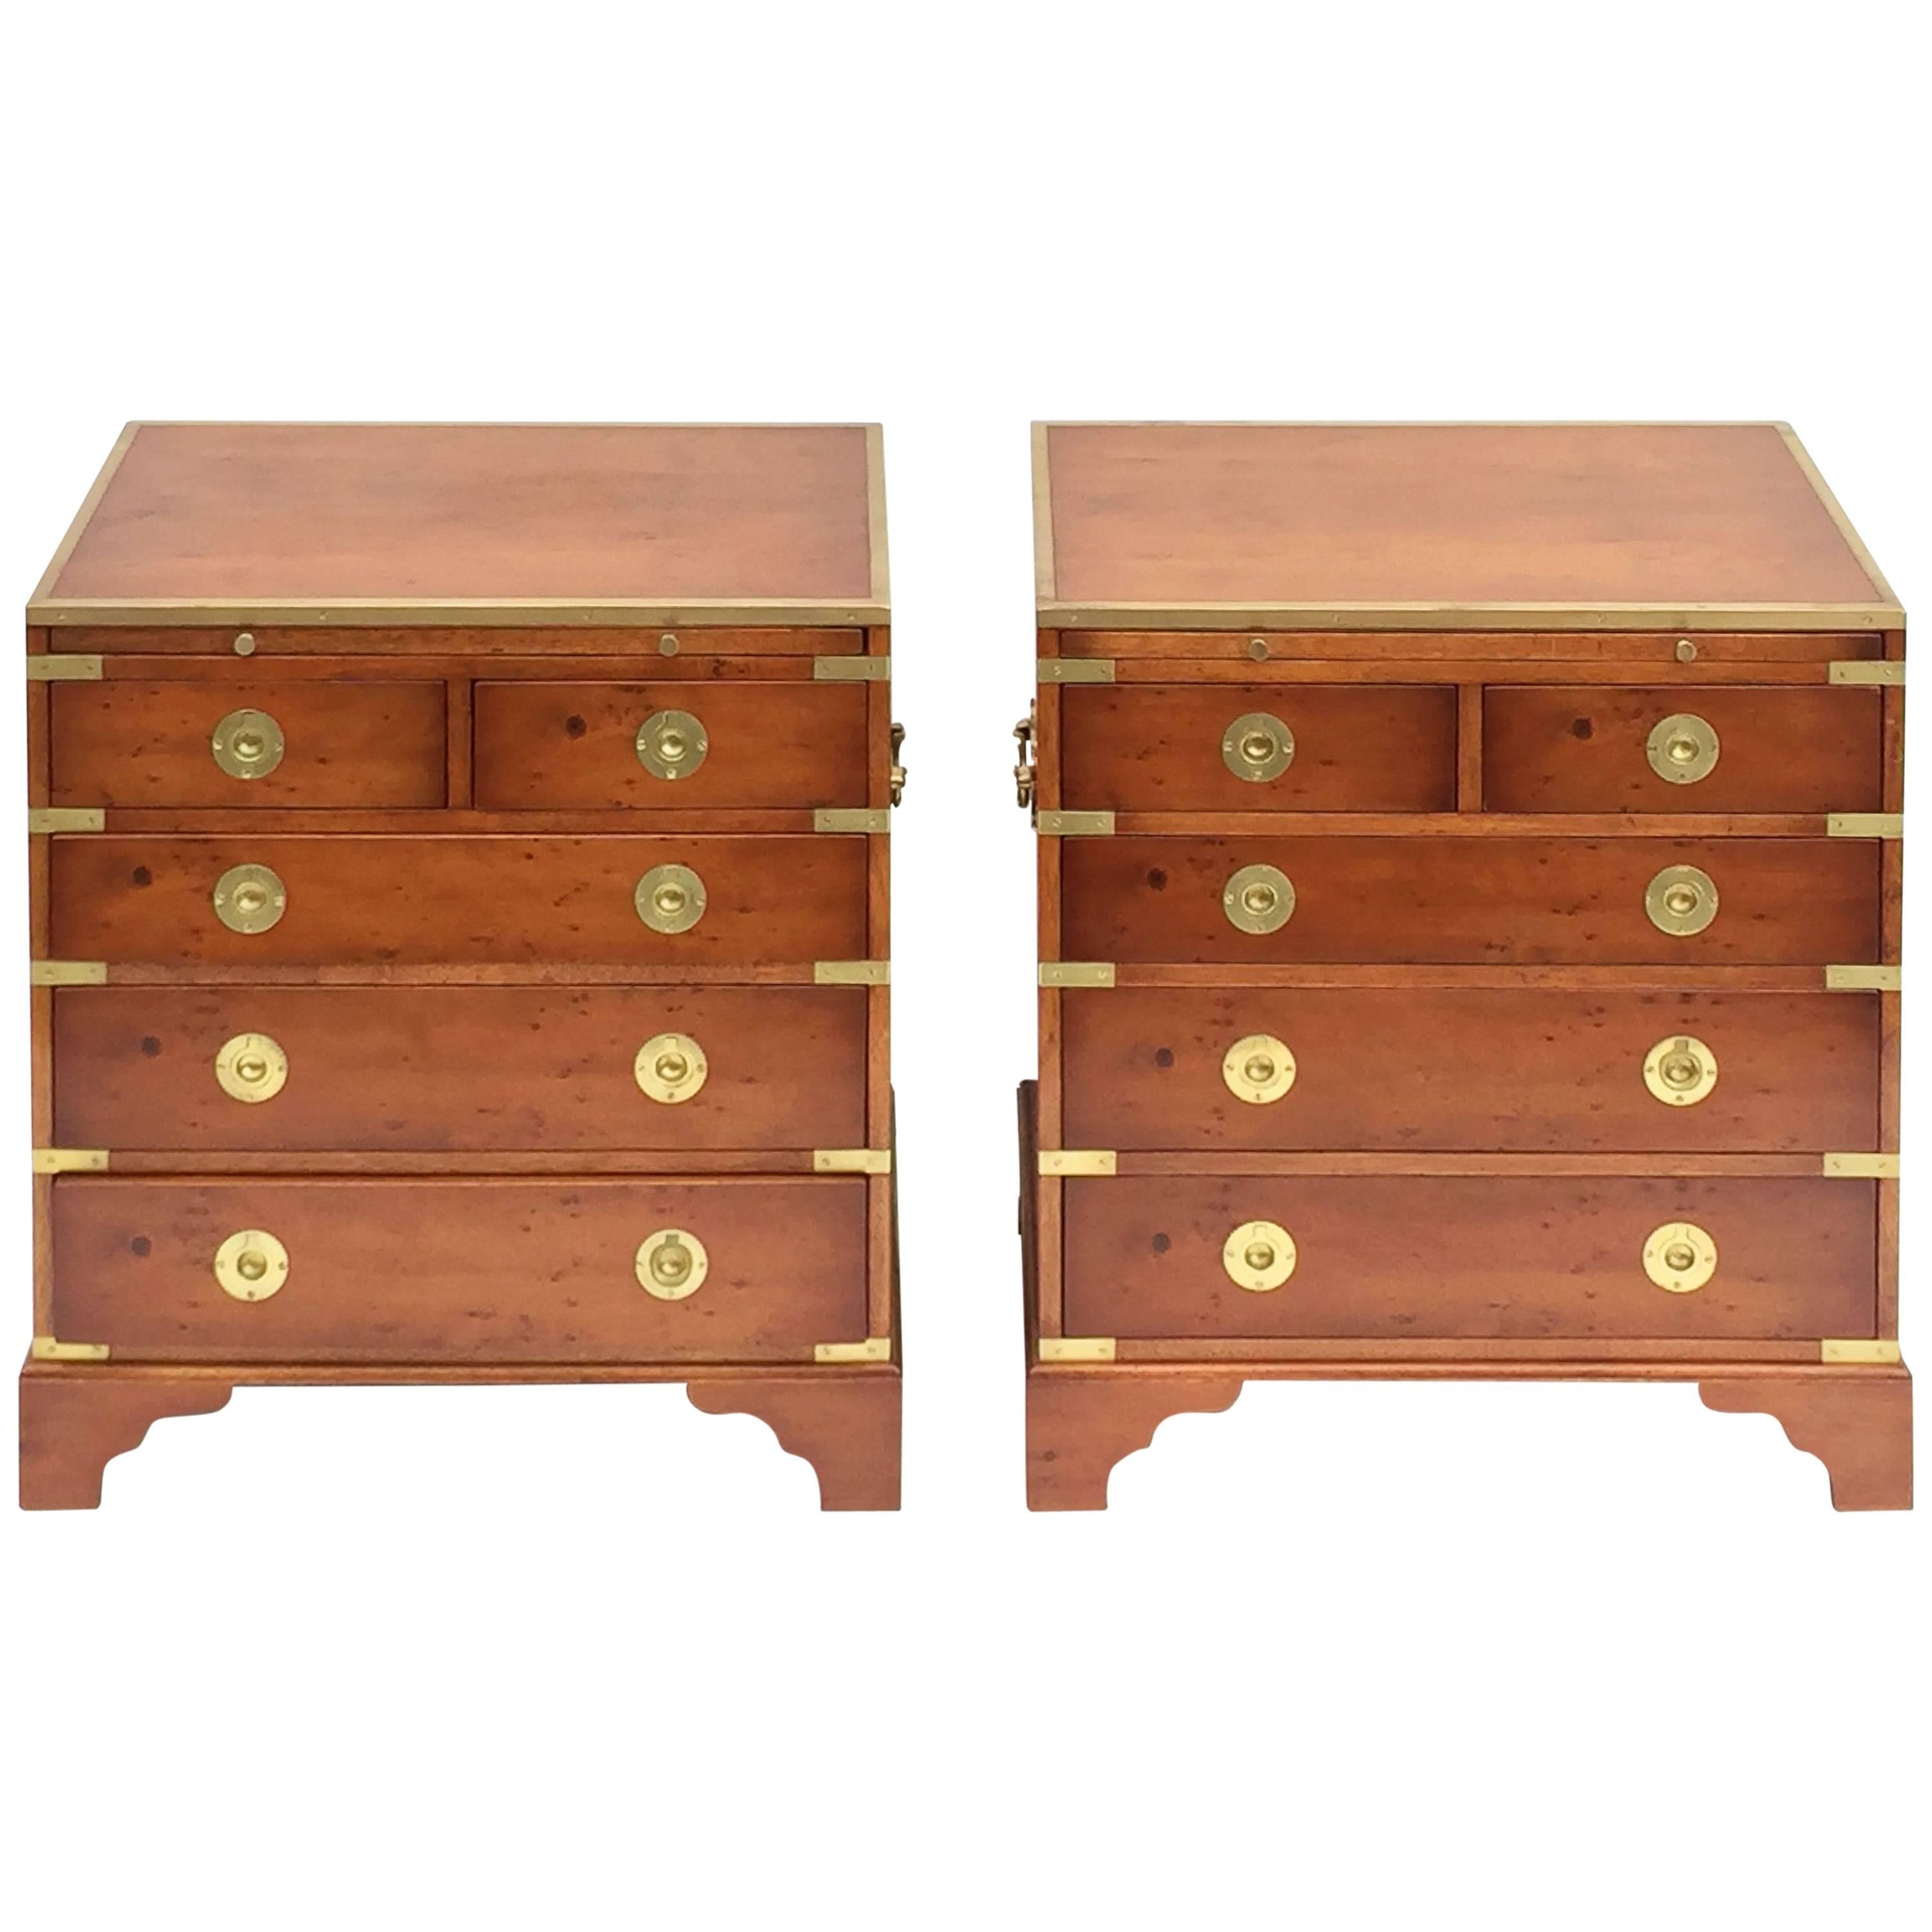 Pair of Campaign Style Nightstands or Low Chests